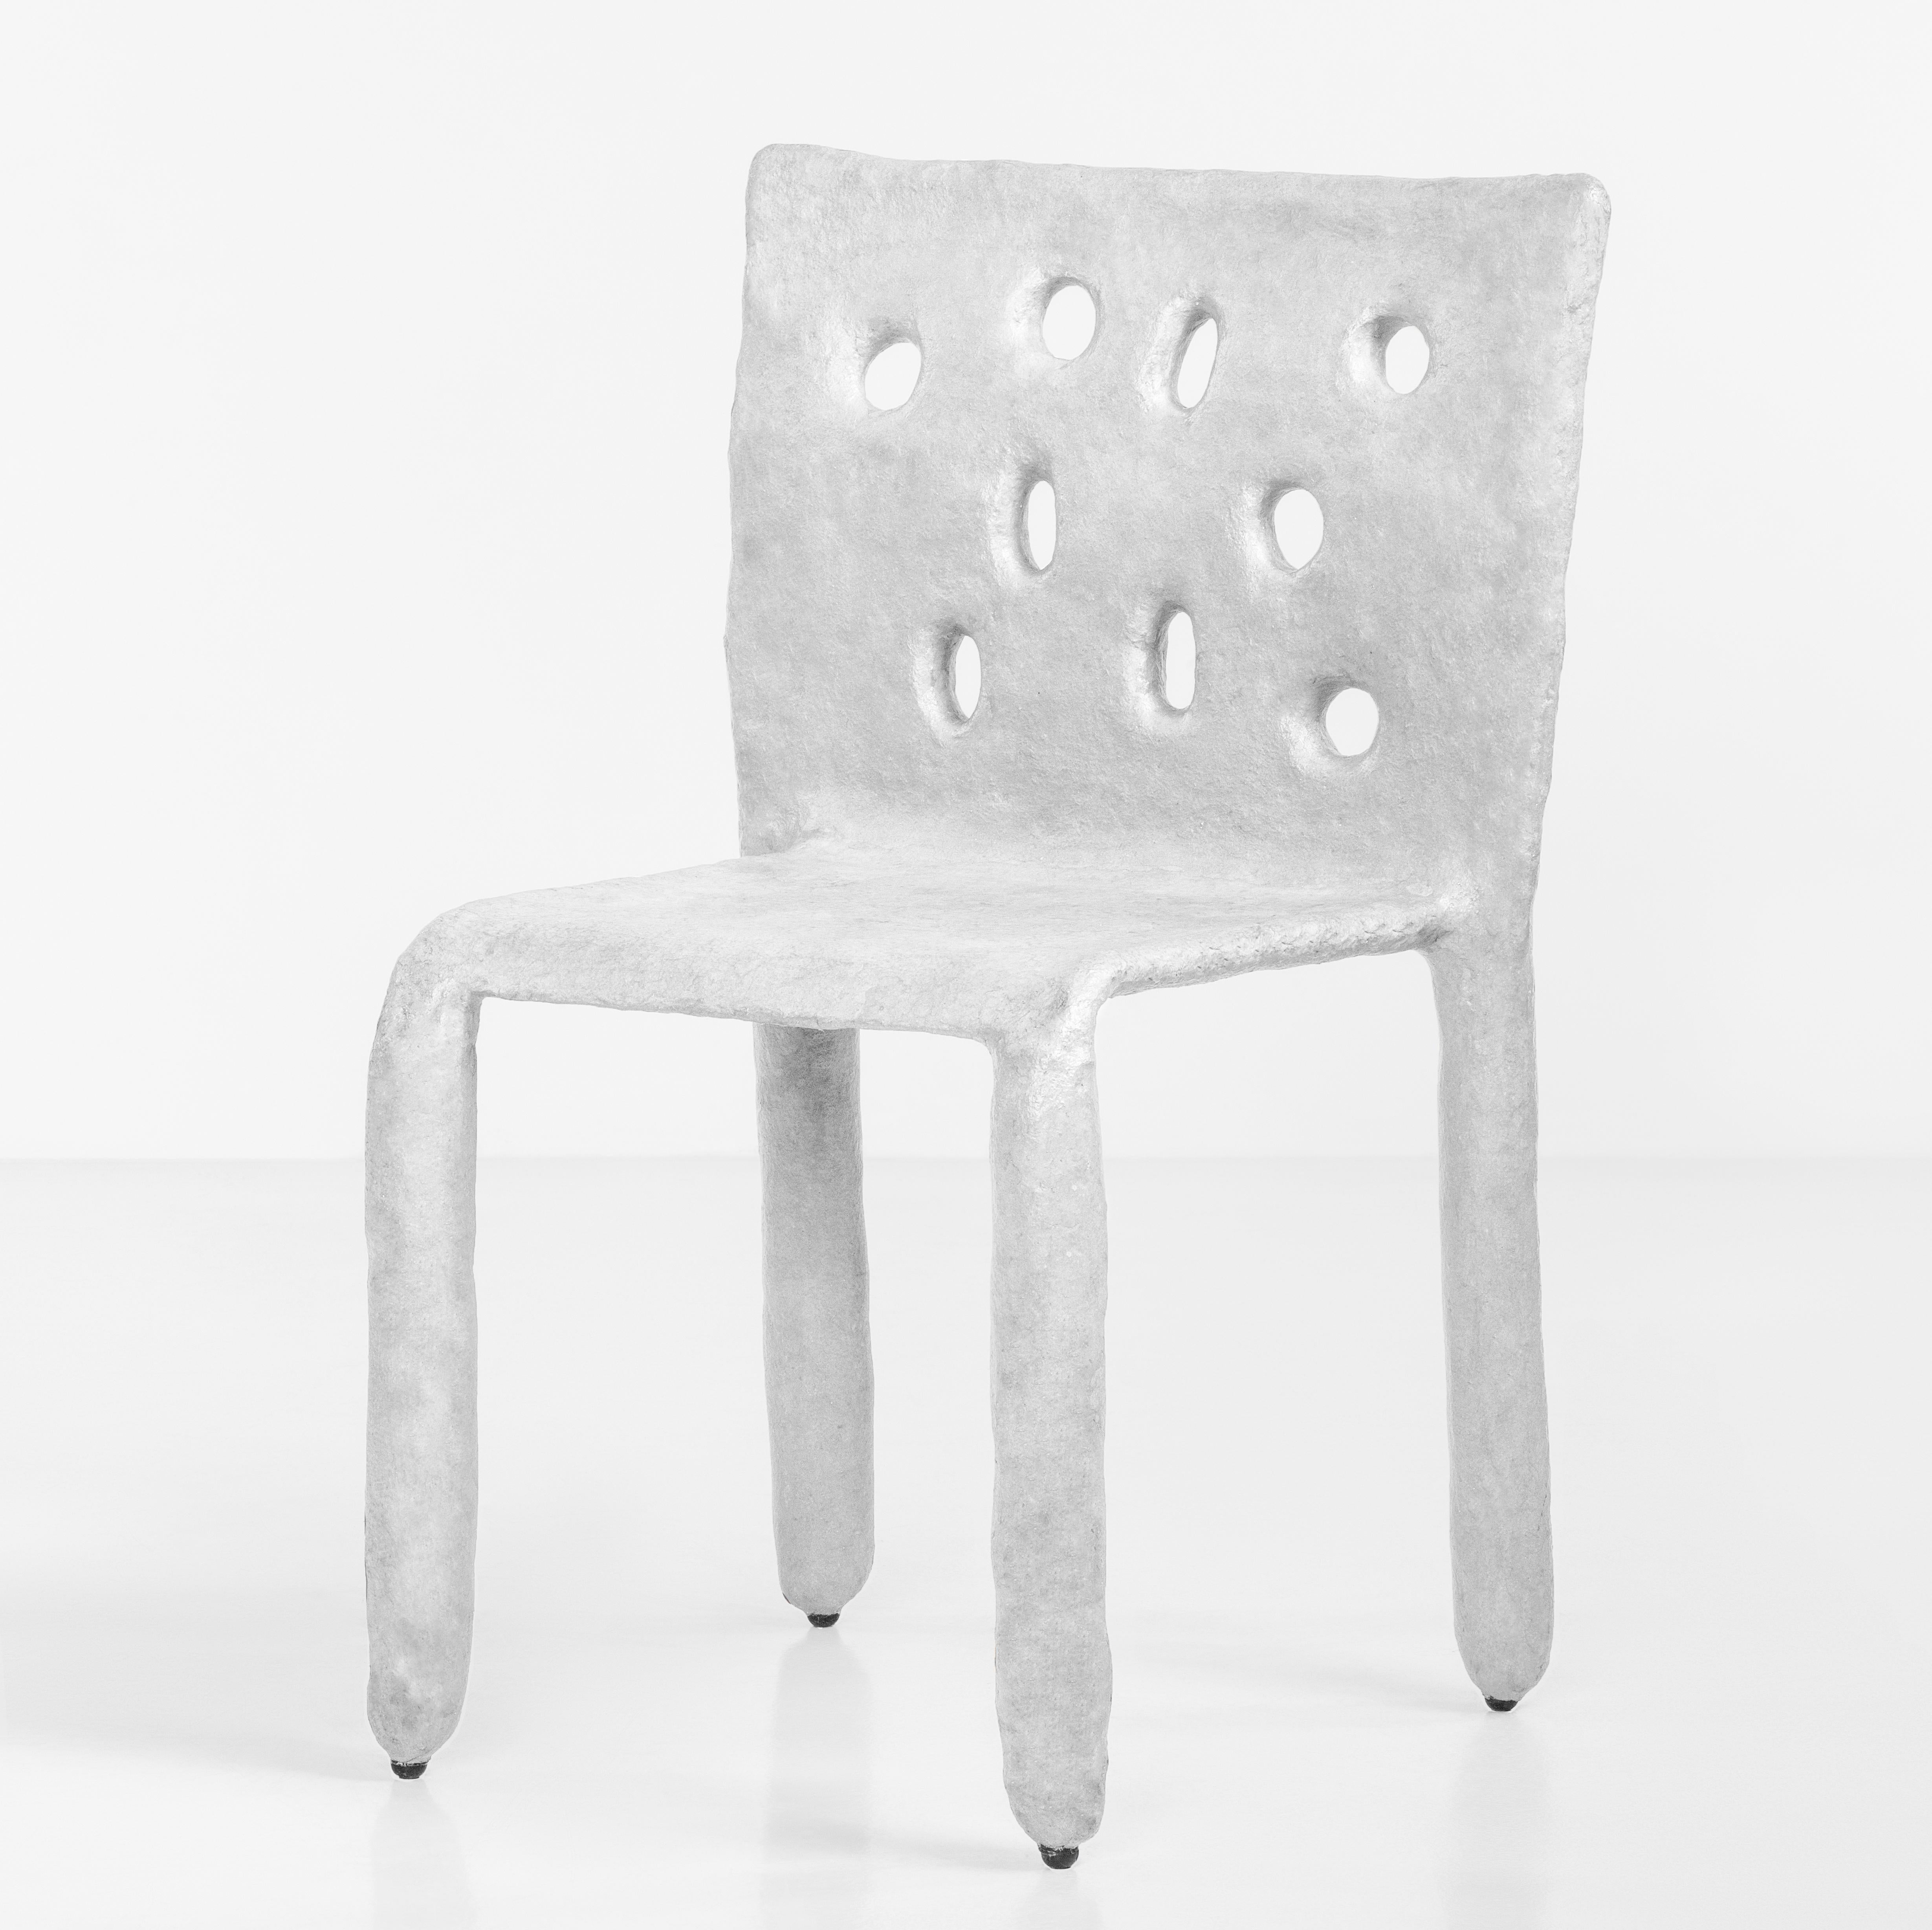 Orange Sculpted Contemporary Chair by Faina For Sale 1